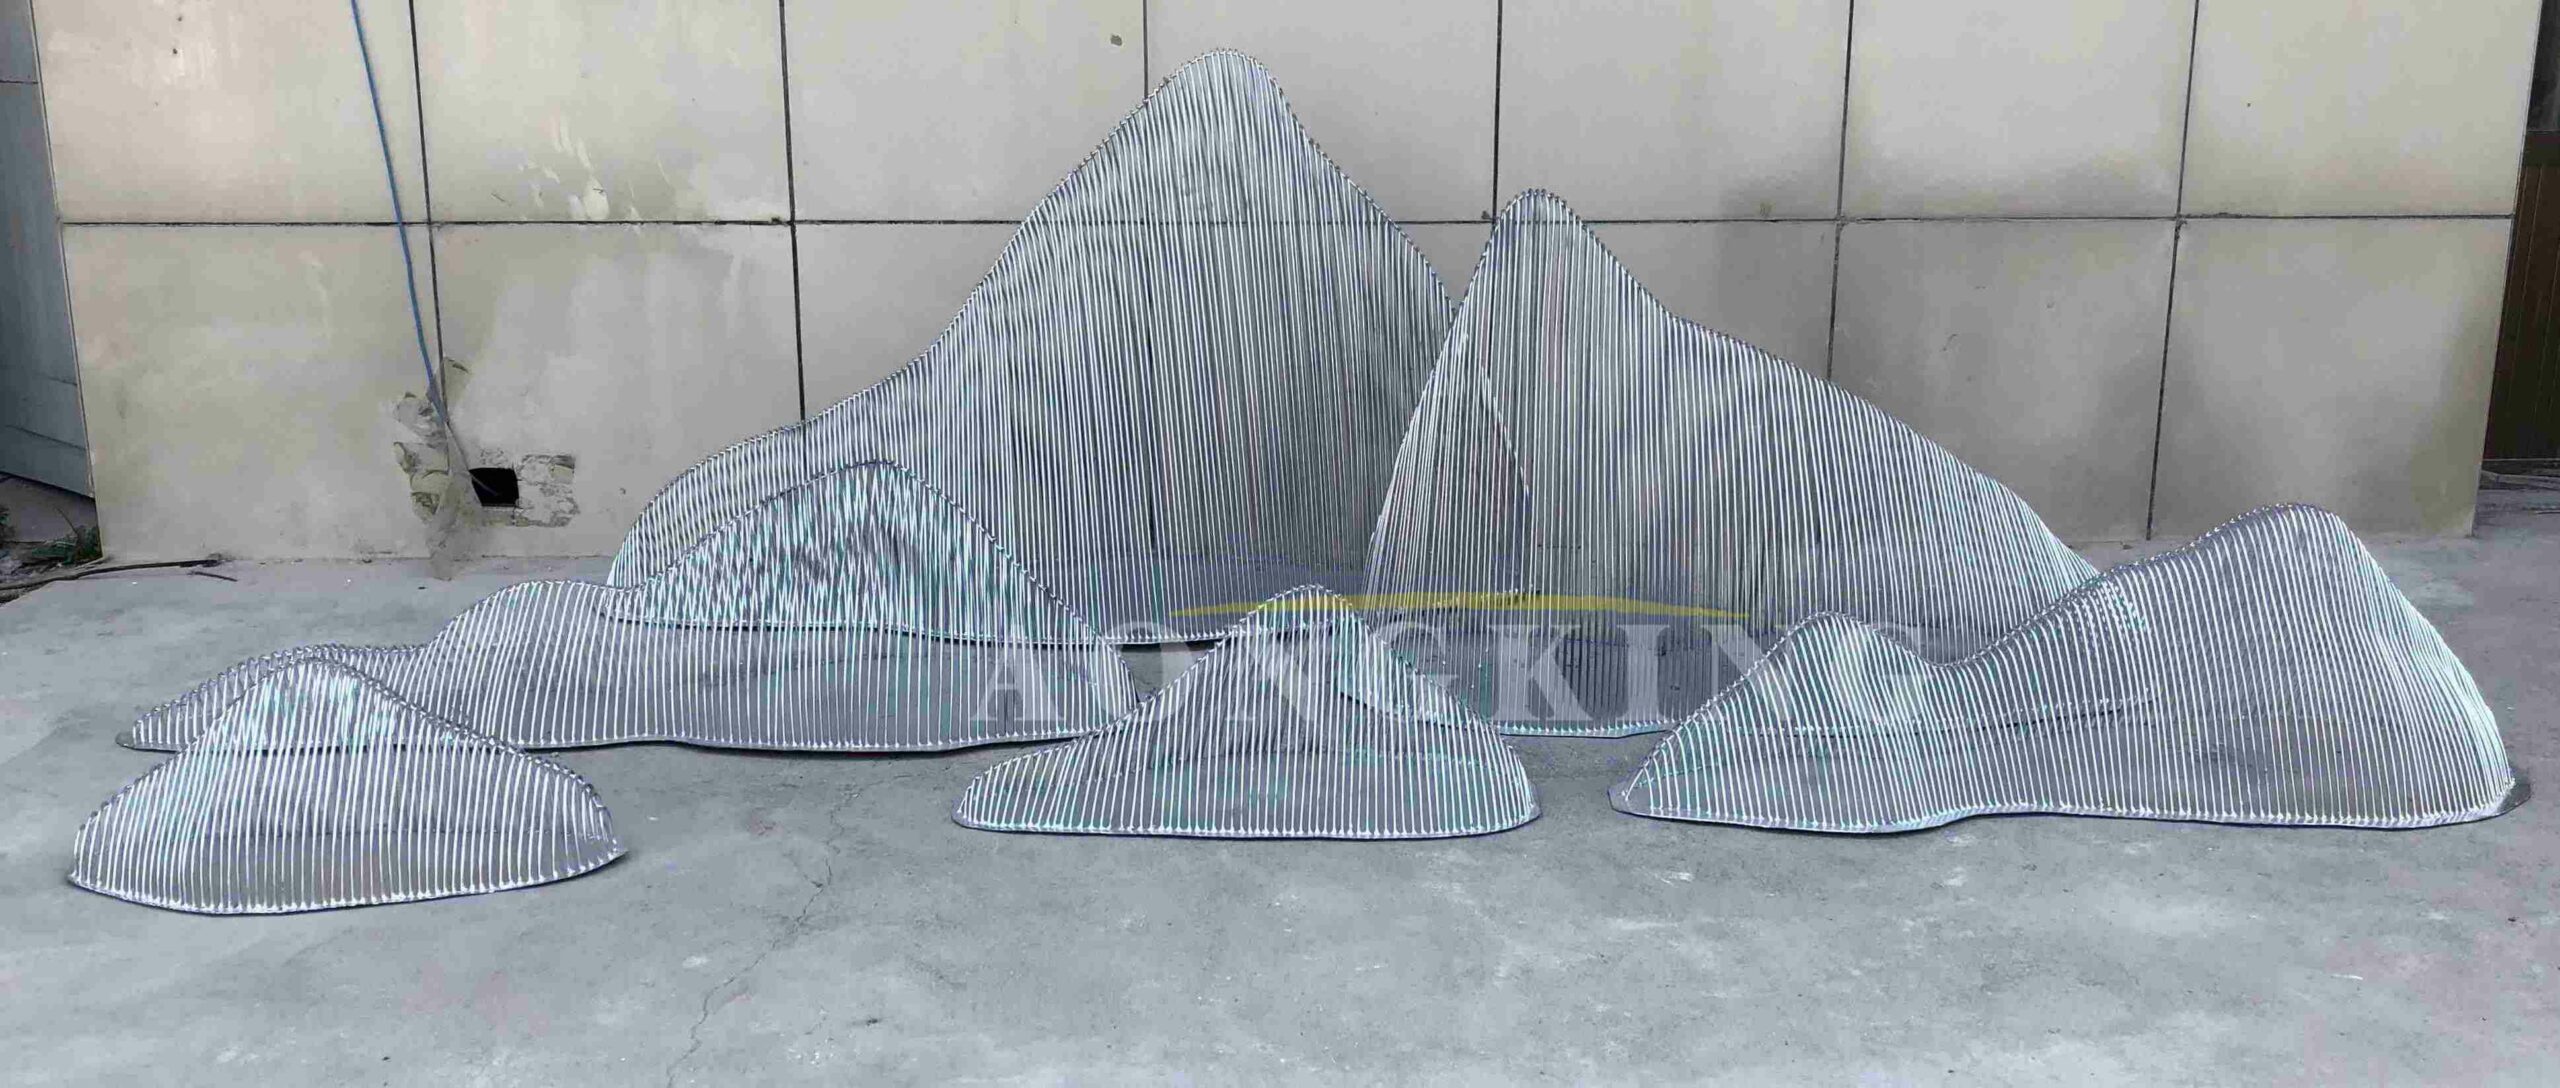 stainless steel wire mesh outdoor sculpture (4)